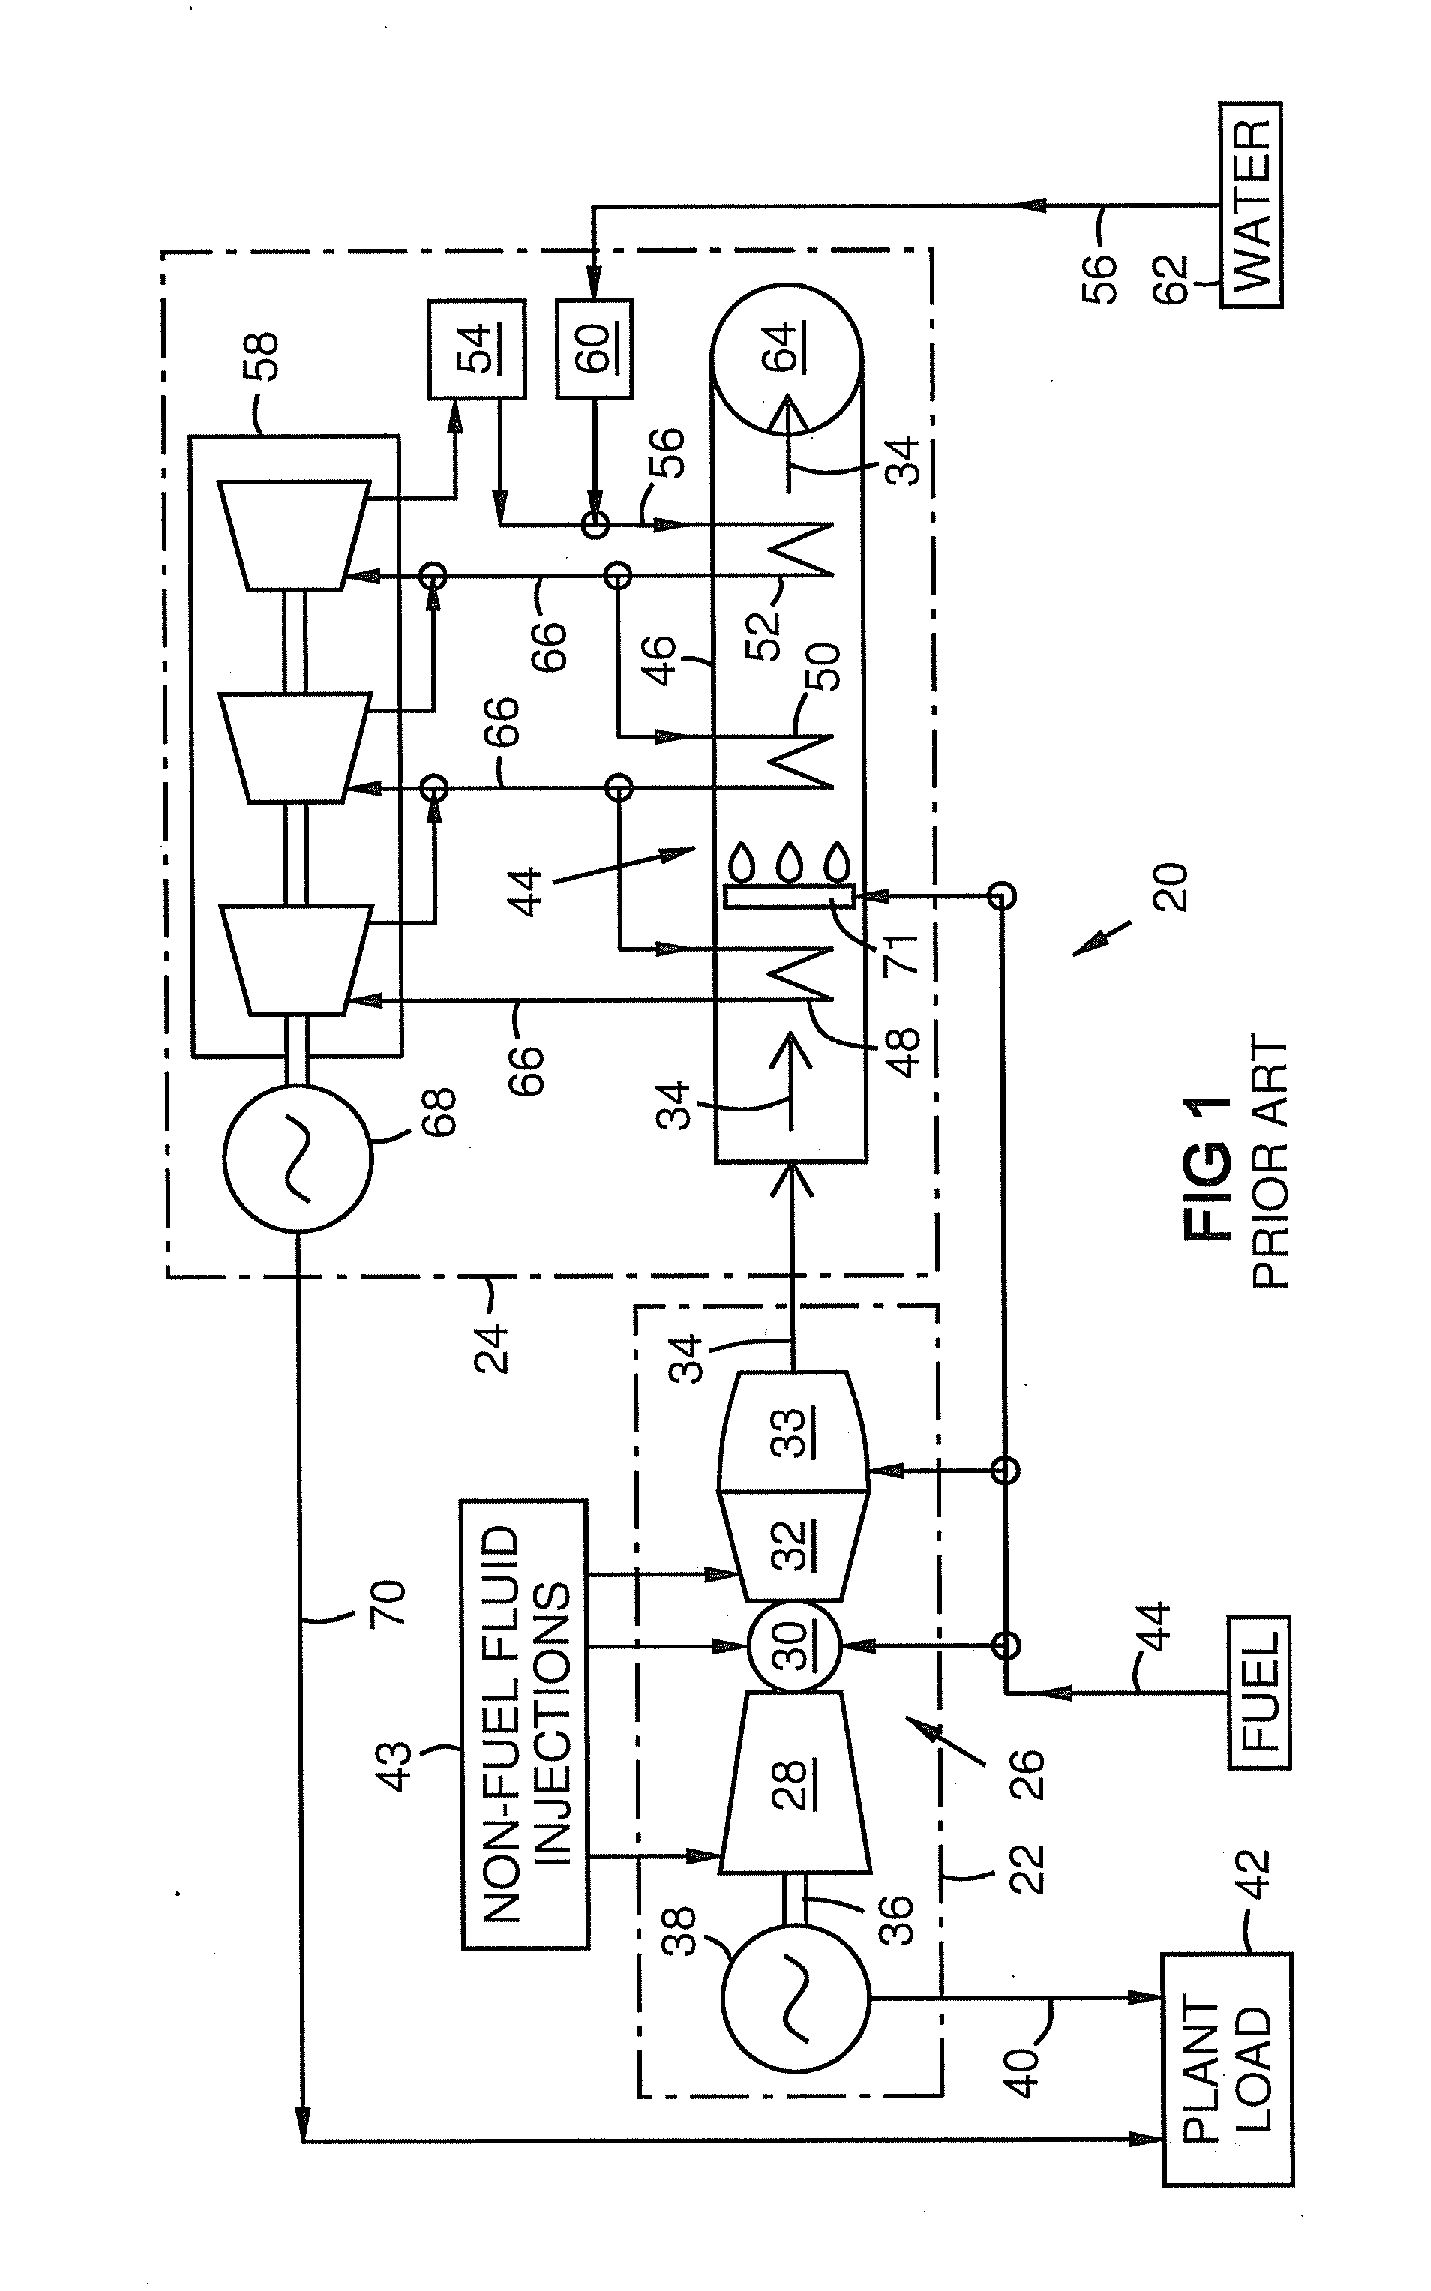 Gas turbine driven electric power system with constant output through a full range of ambient conditions